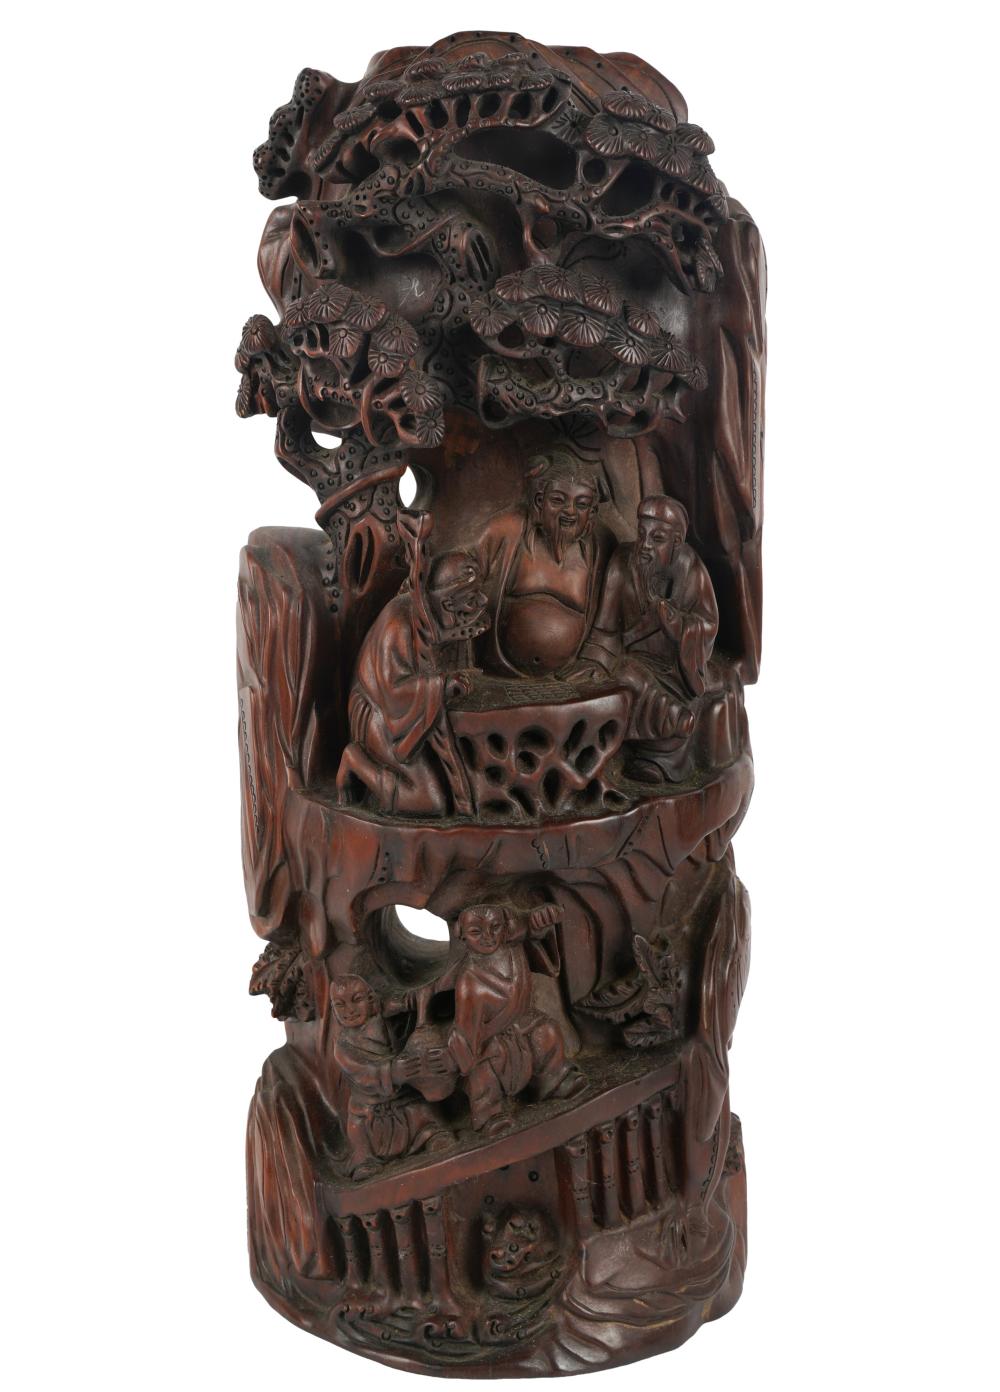 ASIAN WOOD CARVINGAsian Wood Carving,